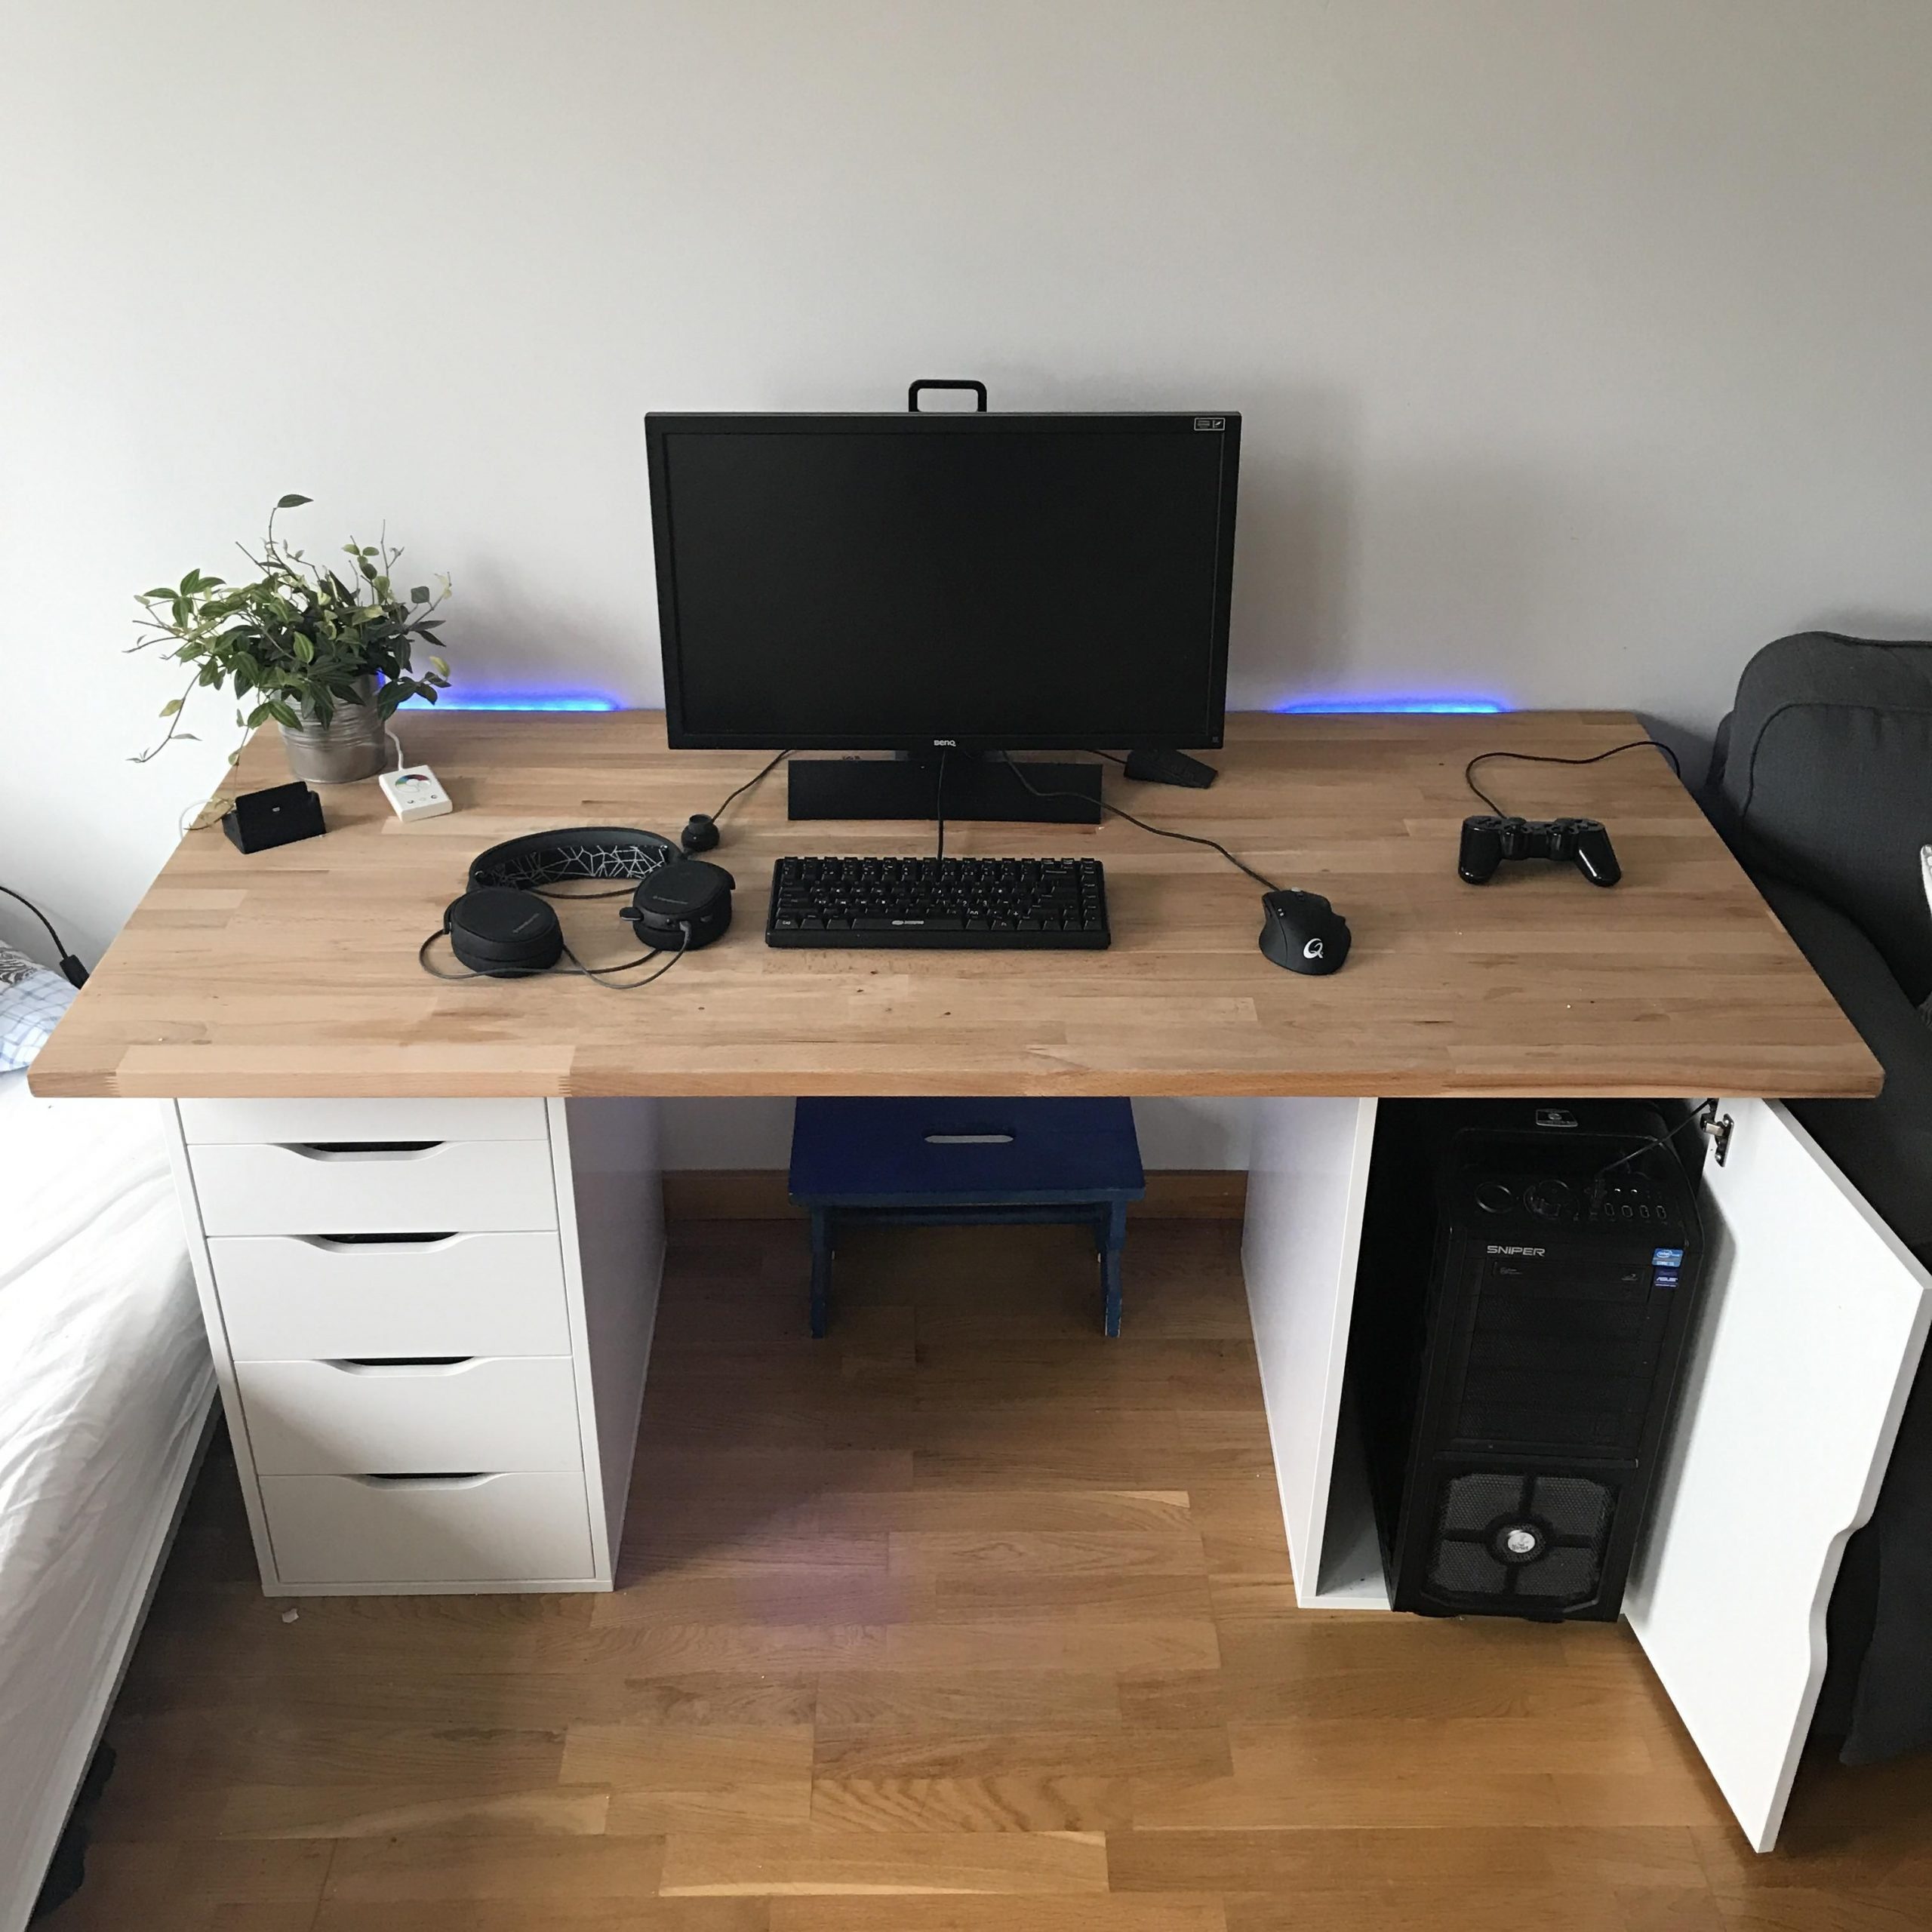 ergonomic How To Make A Gaming Desk From Ikea 